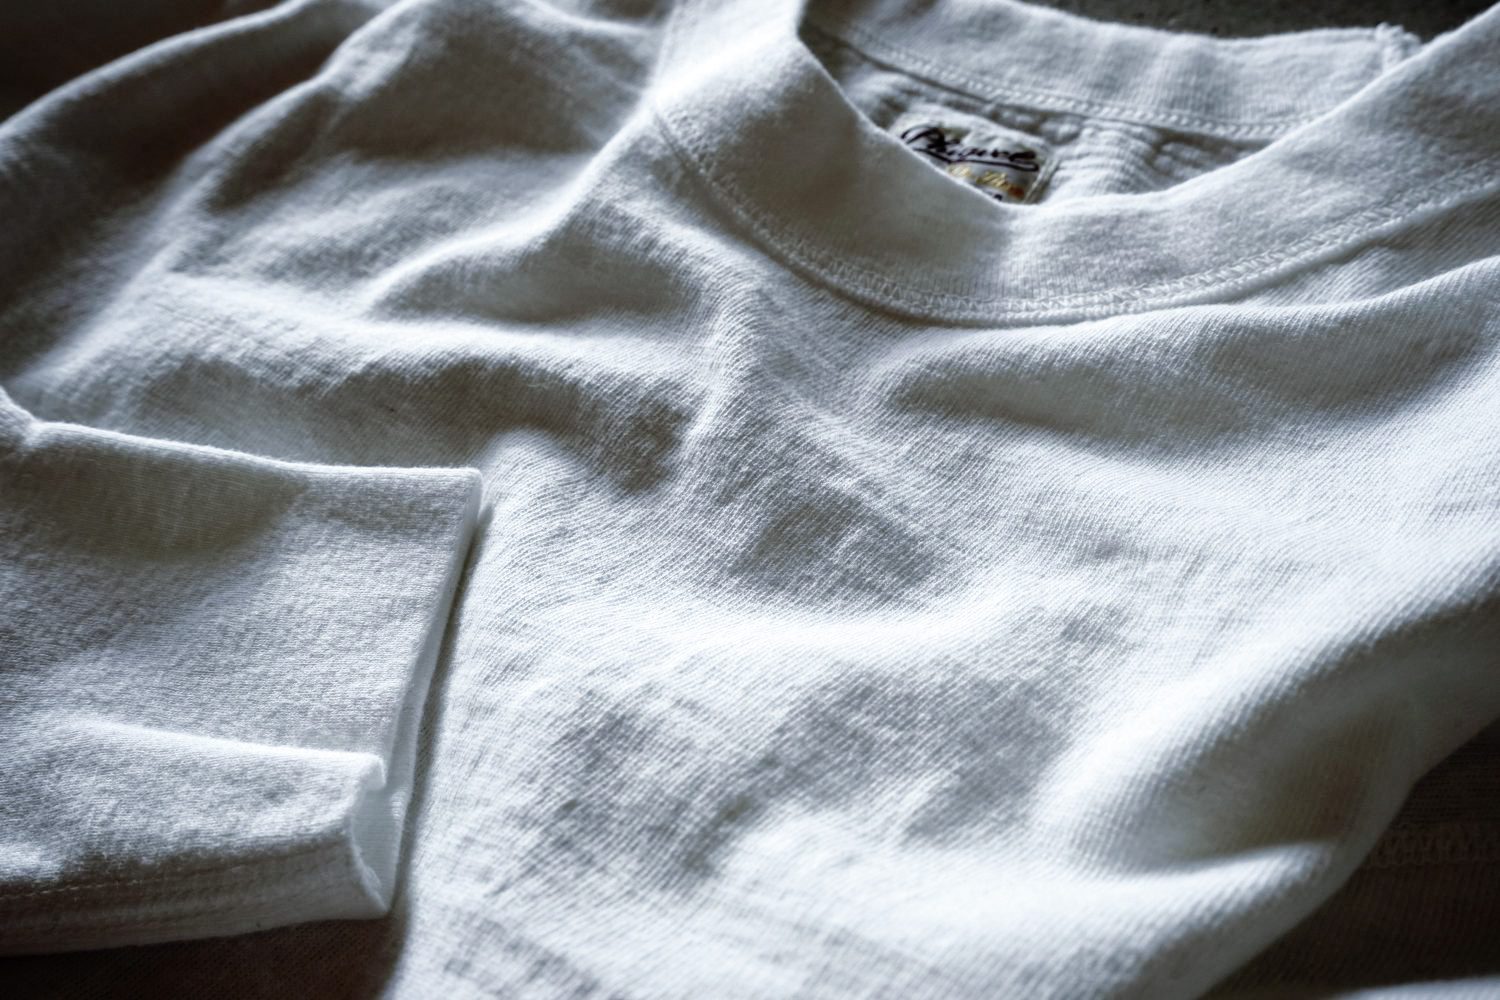 Permanent Products 「Long Sleeve Top / Highneck LS Tee」